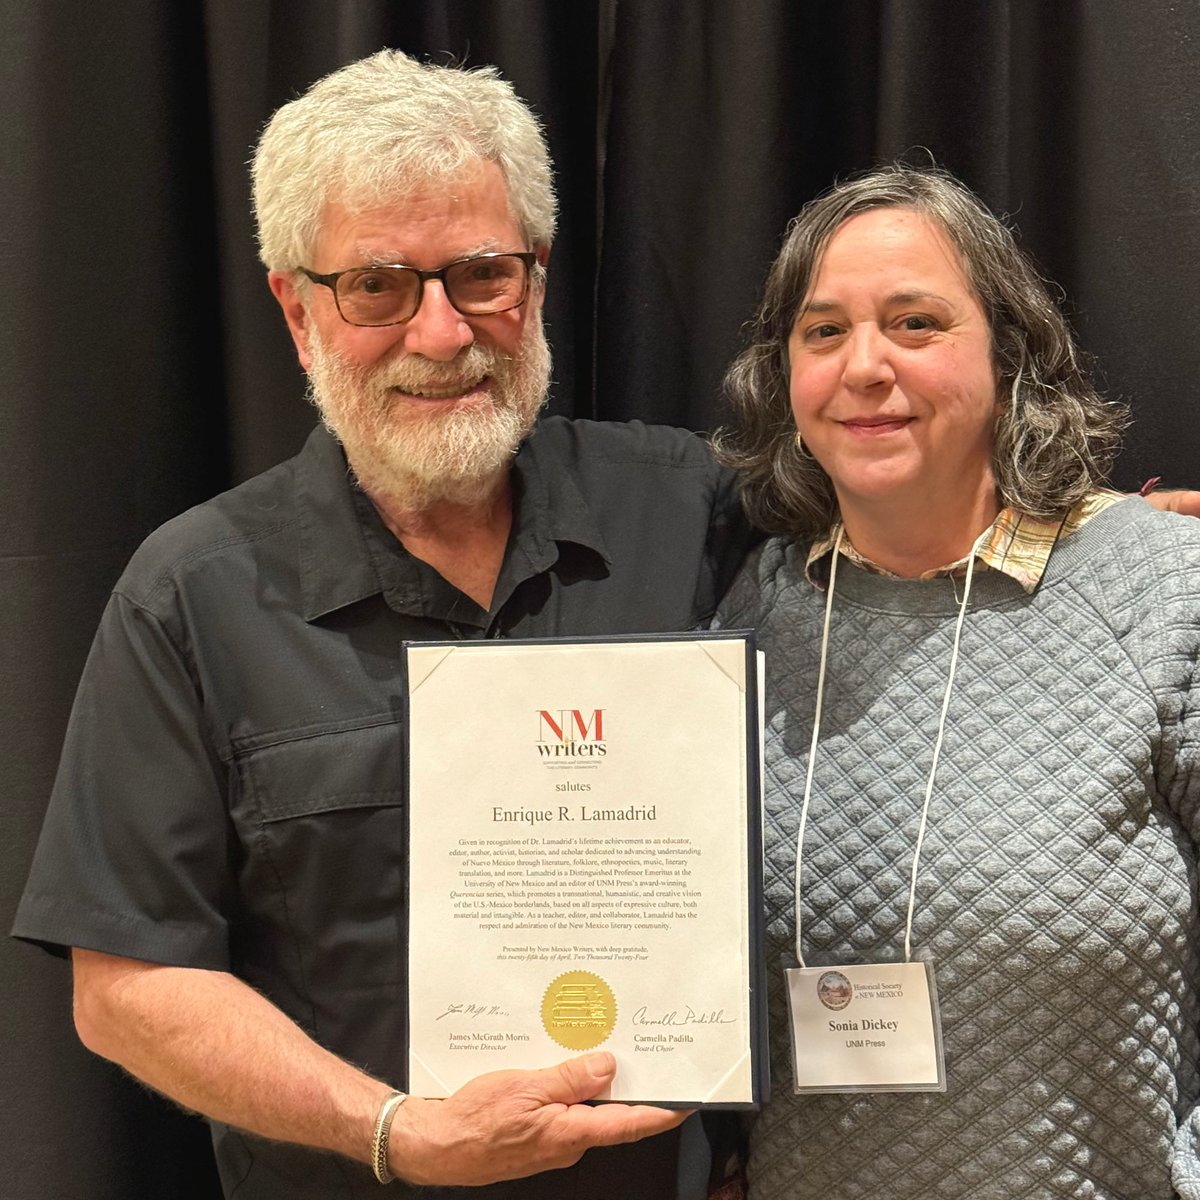 Congratulations to Enrique Lamadrid for receiving the #NewMexicoWriters’ #LifetimeAchievementAward, honoring his contributions to Southwestern literature and recognizing his lifetime achievement as an educator, editor, author, activist, historian, and scholar. #UNMPress #UNM